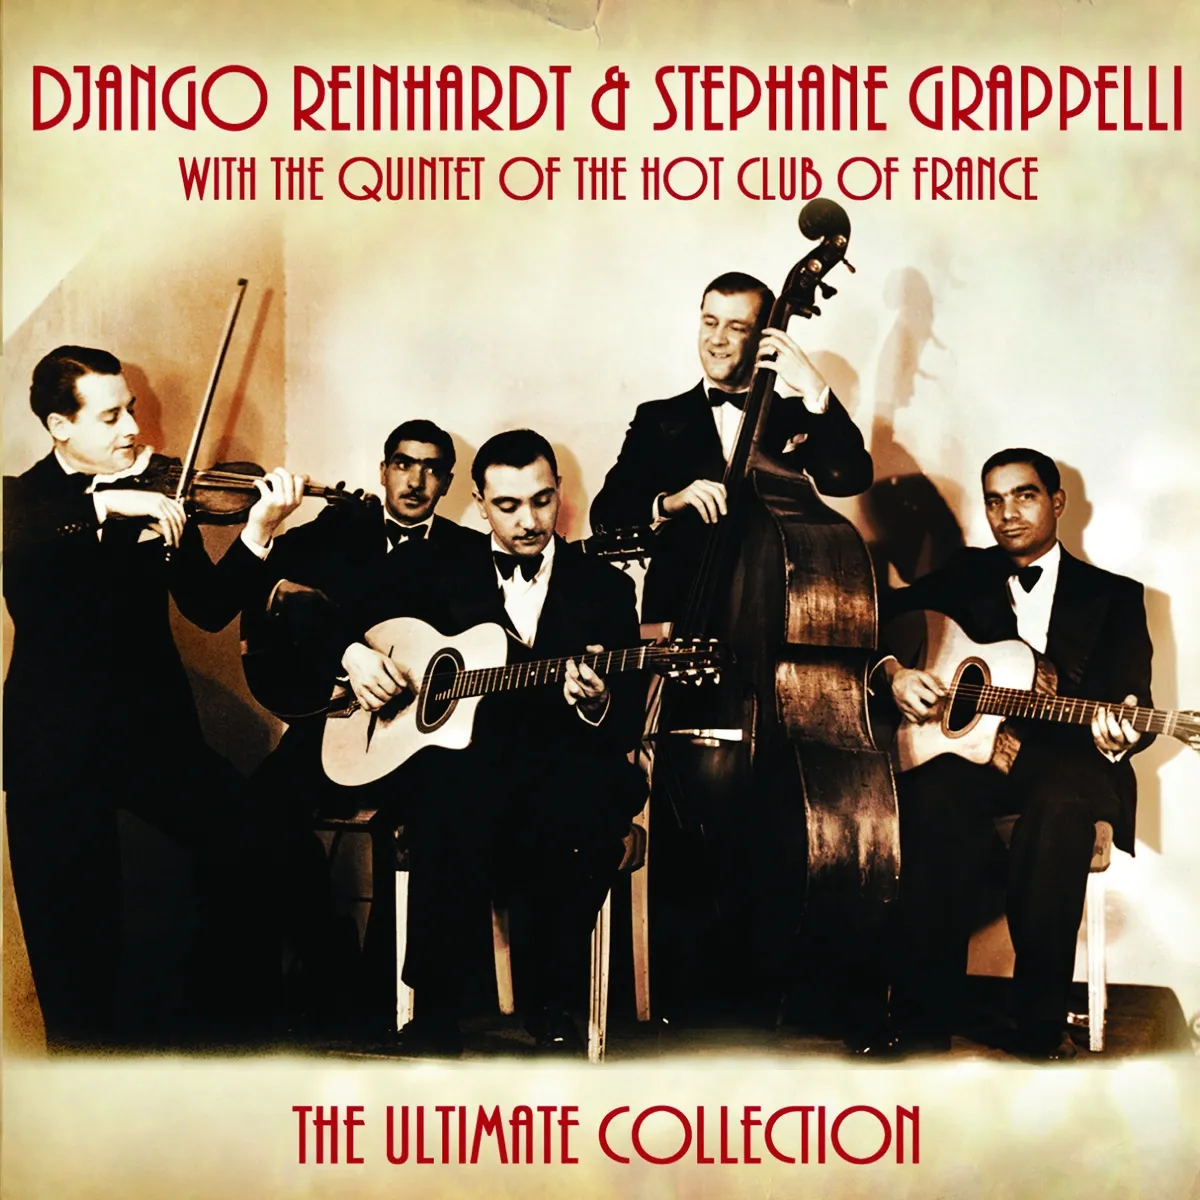 GTC3992-Reinhardt-Grappelli-The-Ultimate-Collection-1-1.webp